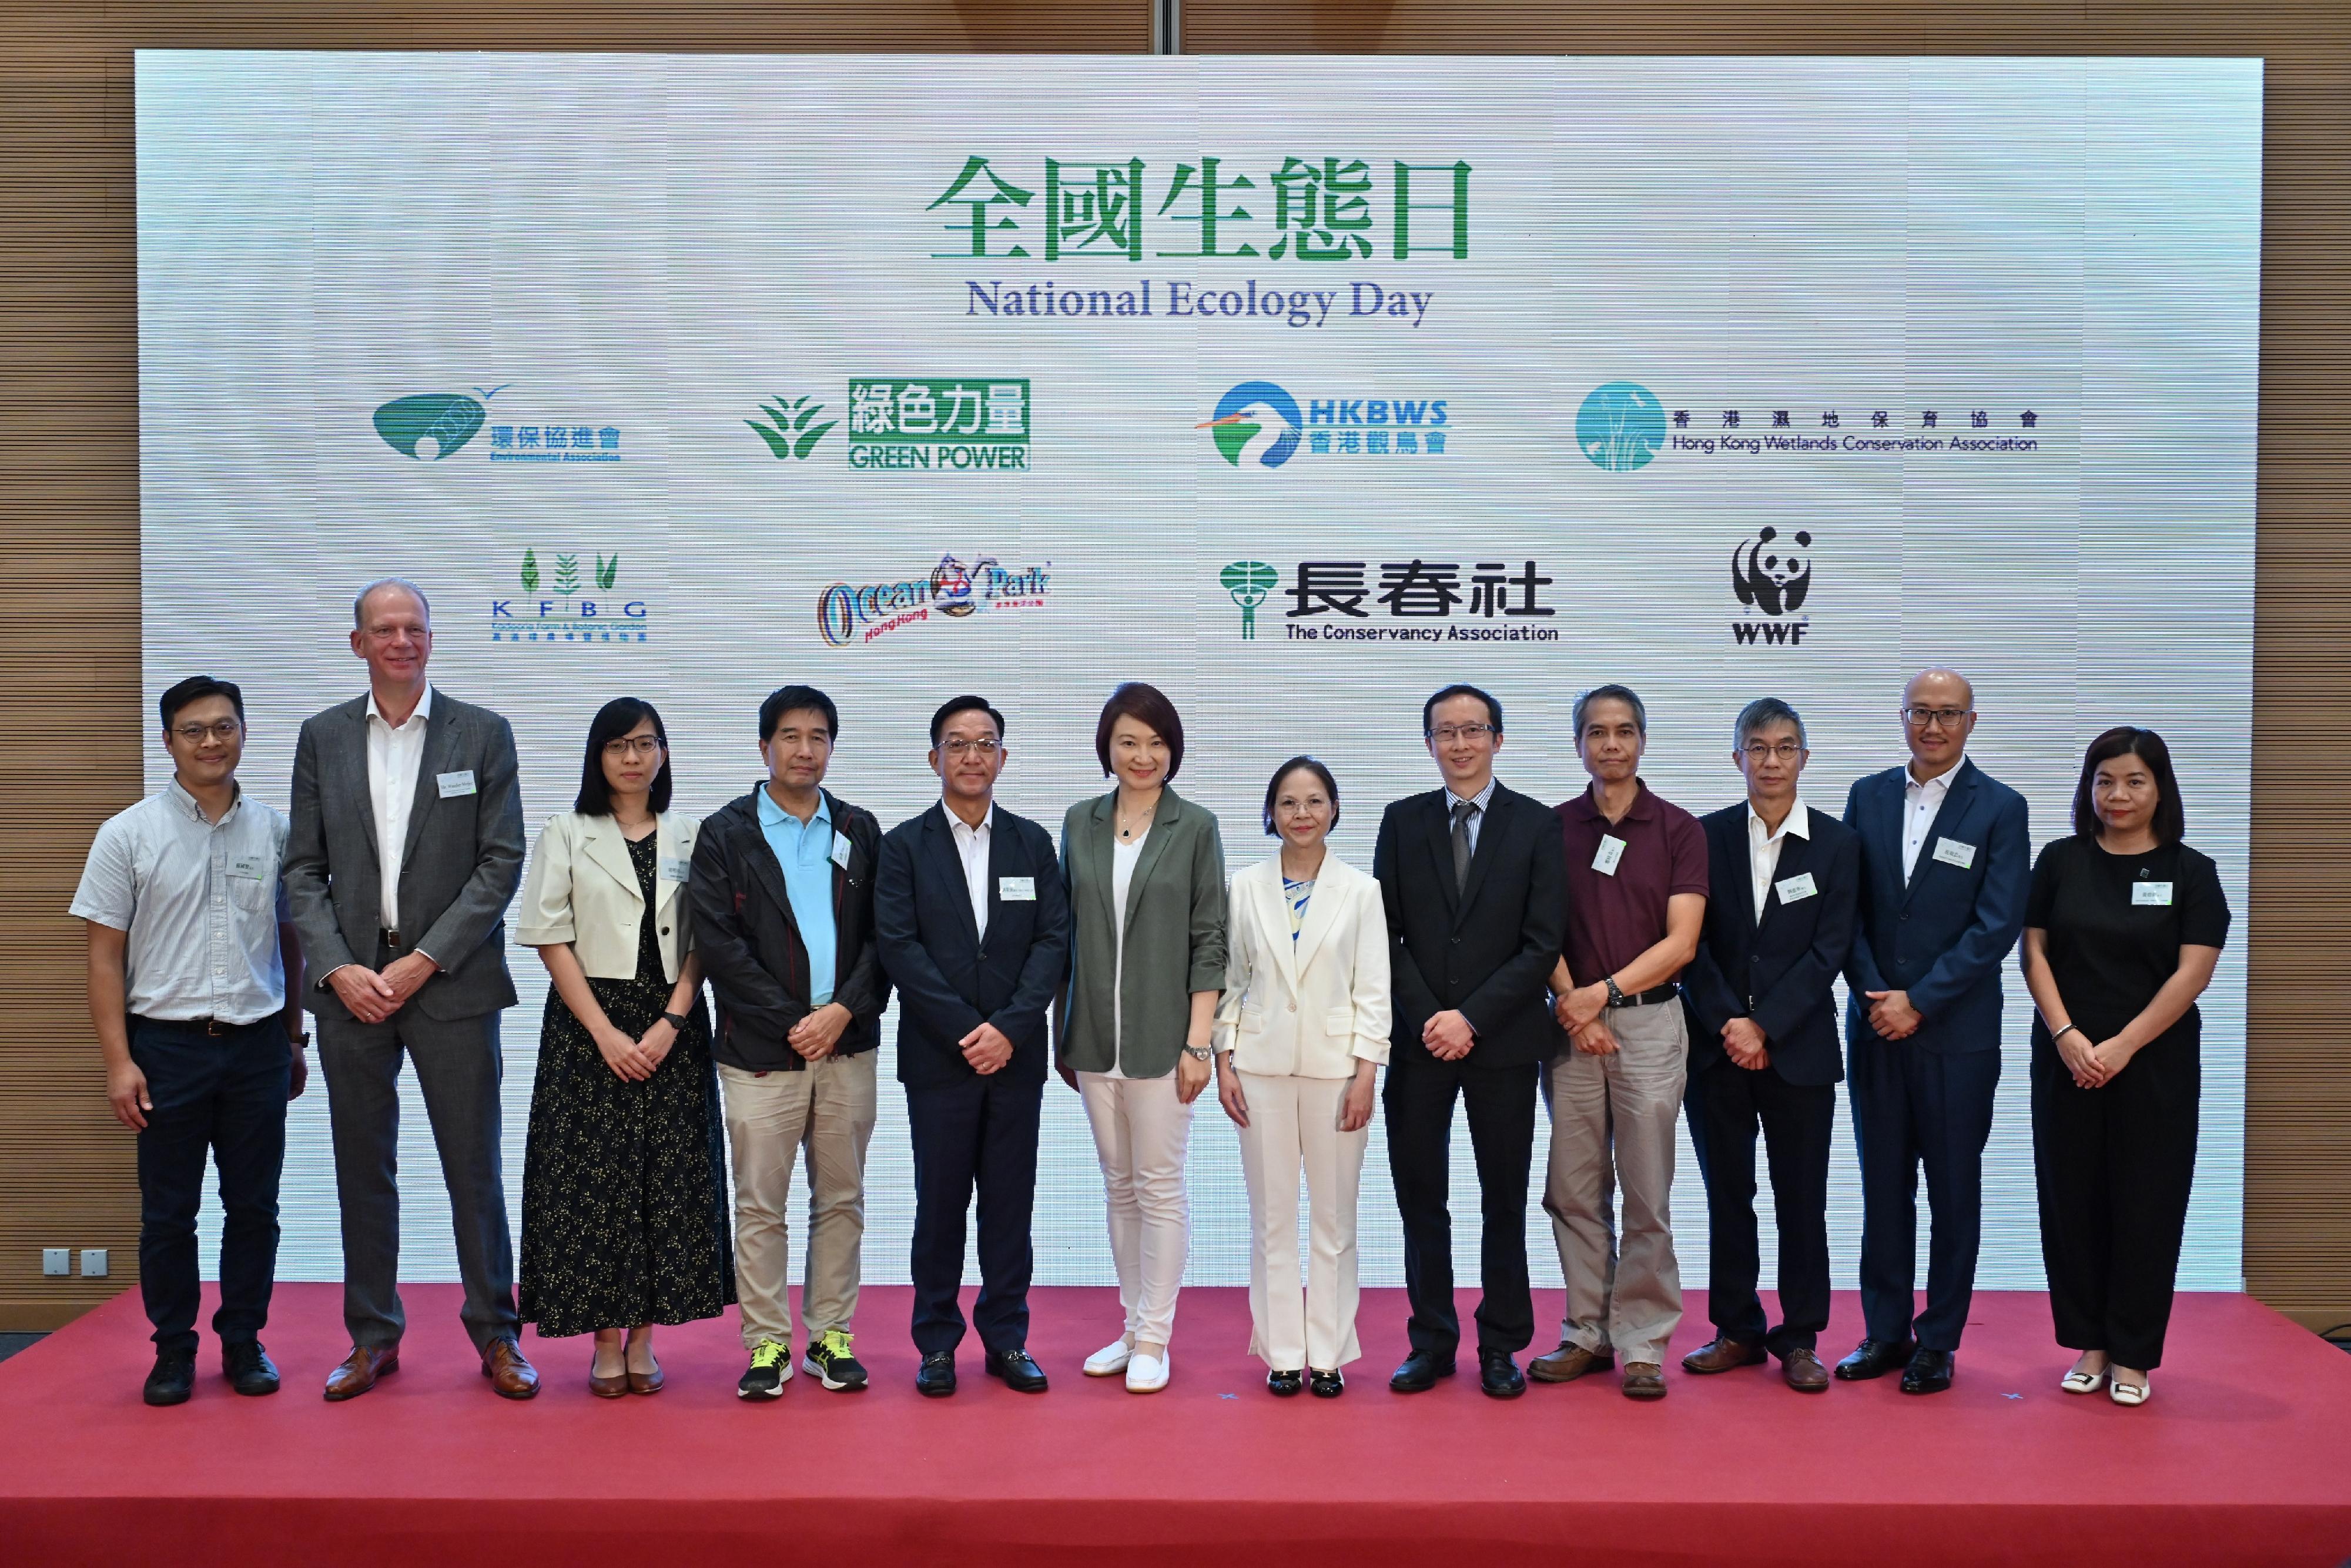 The Government of the Hong Kong Special Administrative Region held the National Ecology Day Launching Ceremony today (August 15) in support of the country's designation of August 15 as National Ecology Day starting this year, with a view to promoting to society the importance of pursuing ecological civilisation and being conscious of the need for action to protect the environment. Photo shows the Acting Secretary for Environment and Ecology, Miss Diane Wong (sixth right); member of the Standing Committee of the 14th National People's Congress and Member of the Legislative Council Ms Starry Lee (sixth left); the Chairman of Heung Yee Kuk New Territories, Mr Kenneth Lau (fifth left); and the Acting Director of the Hong Kong Observatory, Mr Lee Lap-shun (fifth right), with the representatives of the eight organisations supporting the public engagement activities of National Ecology Day.